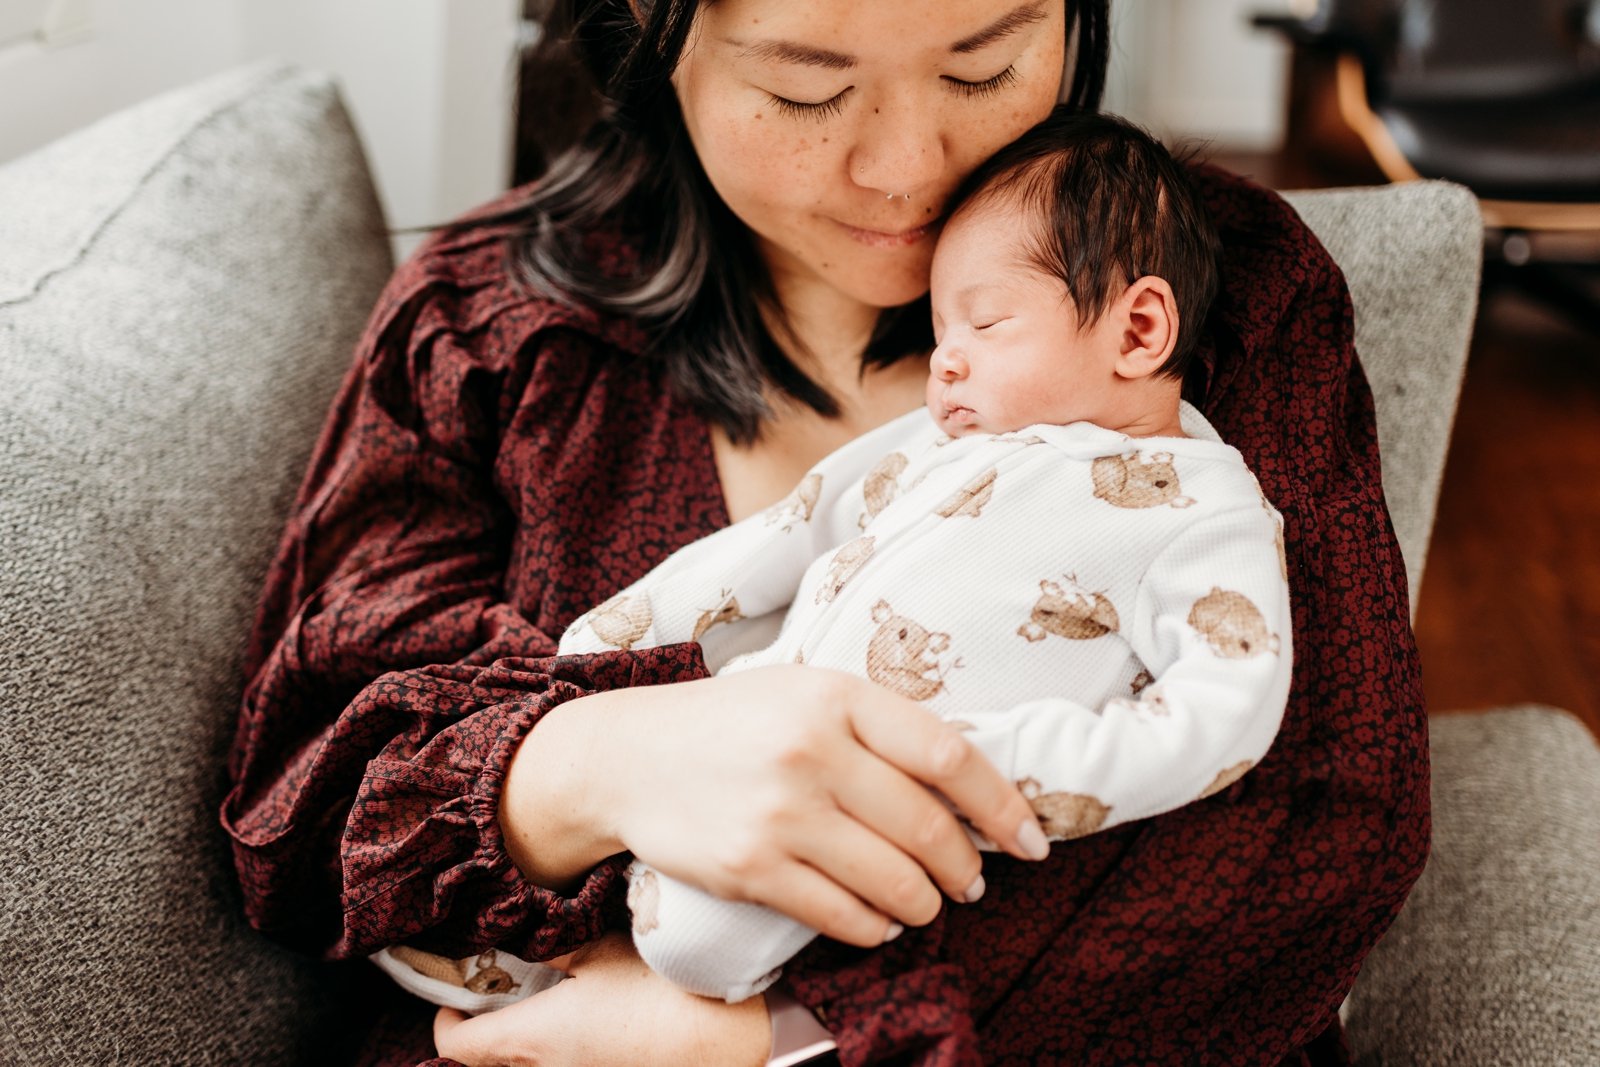 Walnut creek Newborn lifestyle photography at home photoshoot Young Soul Photography East Bay Photographer 17.jpg